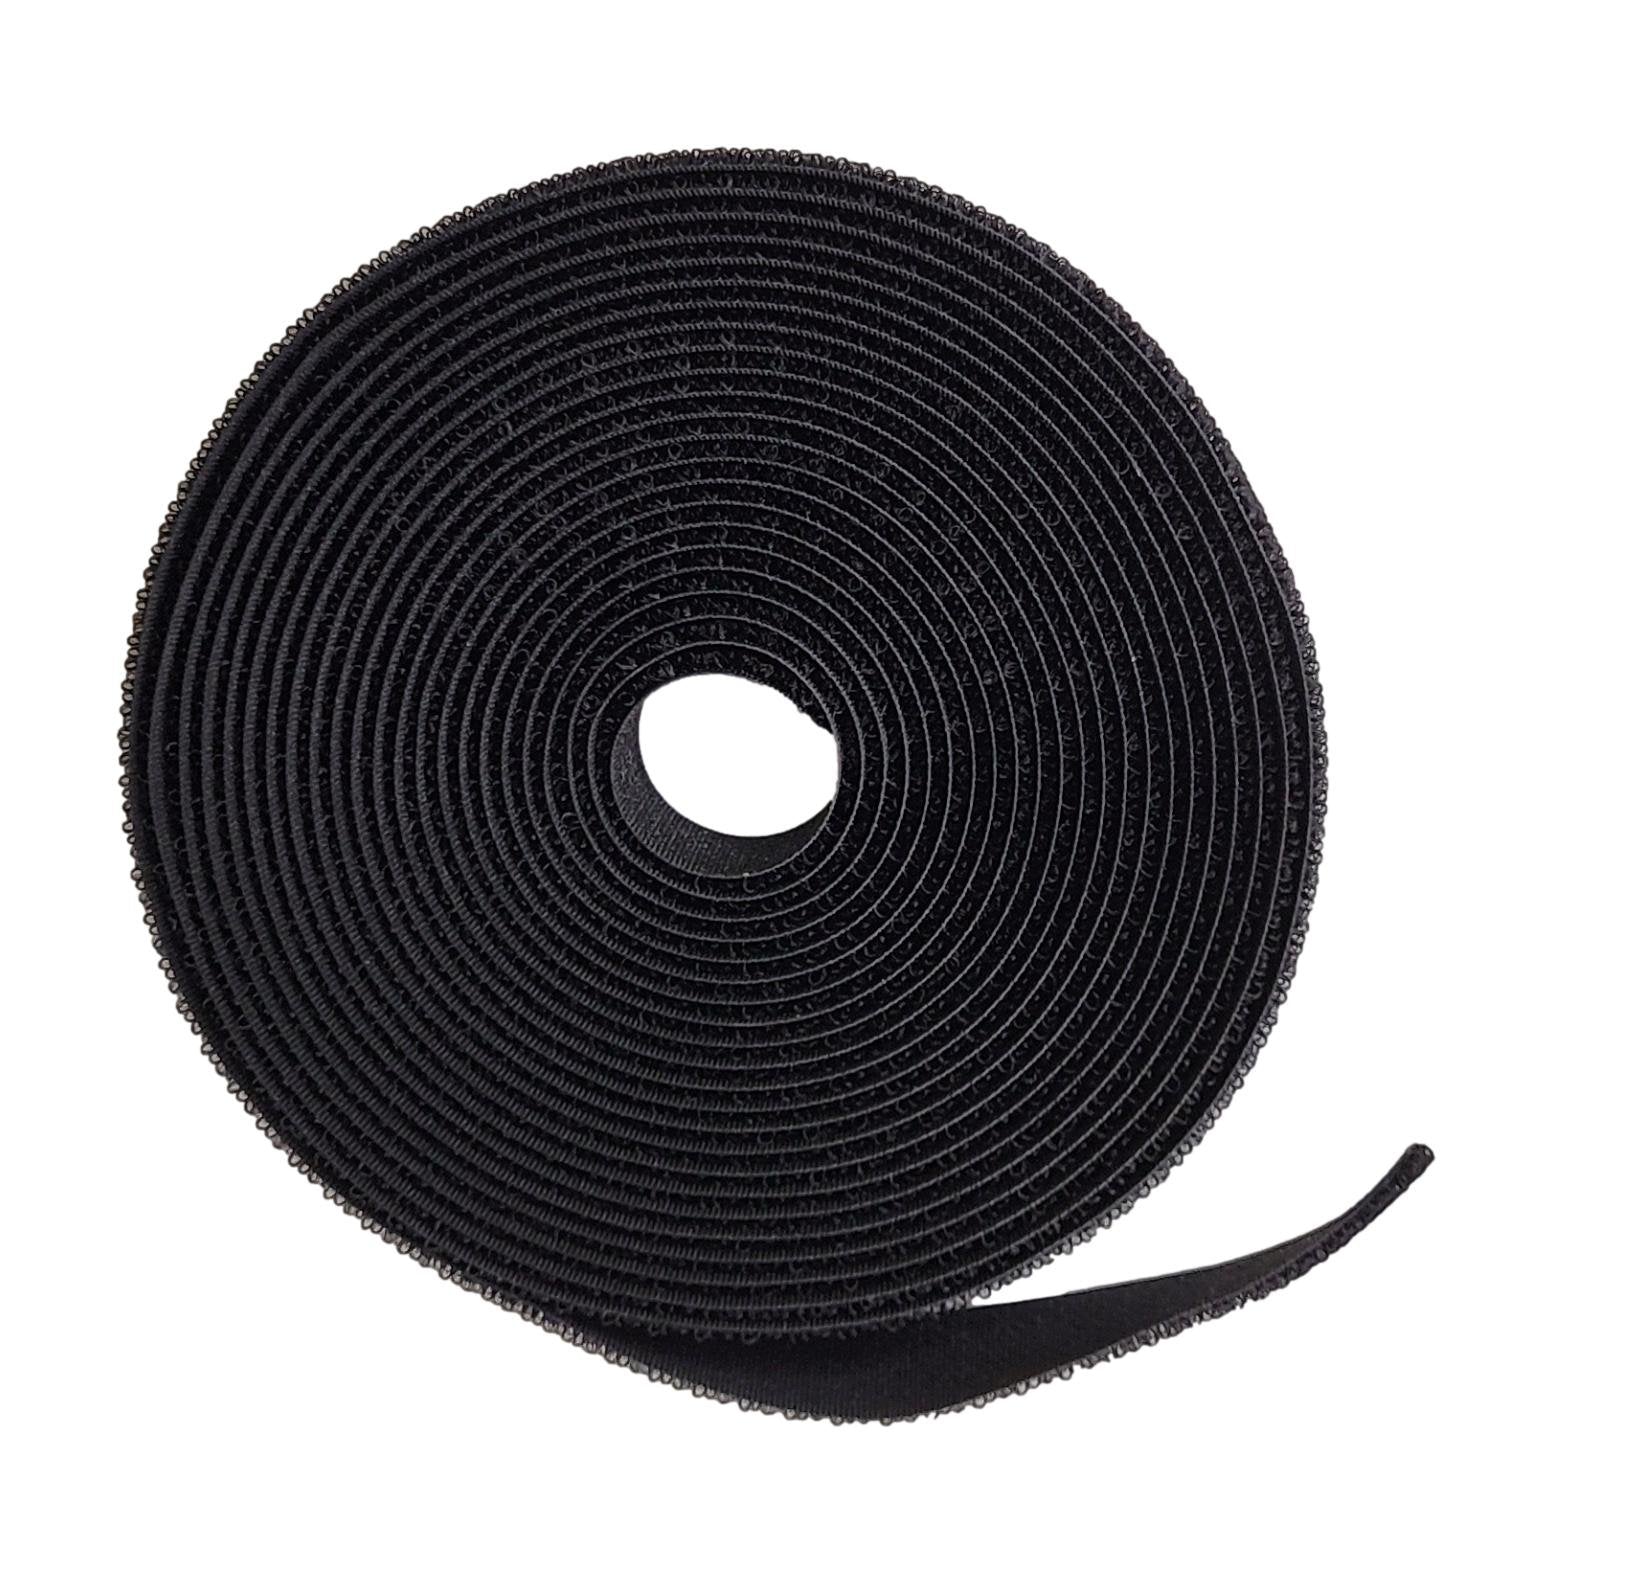 Benristraps 19mm Hook and Loop Together Tape (5 metre roll) (2)